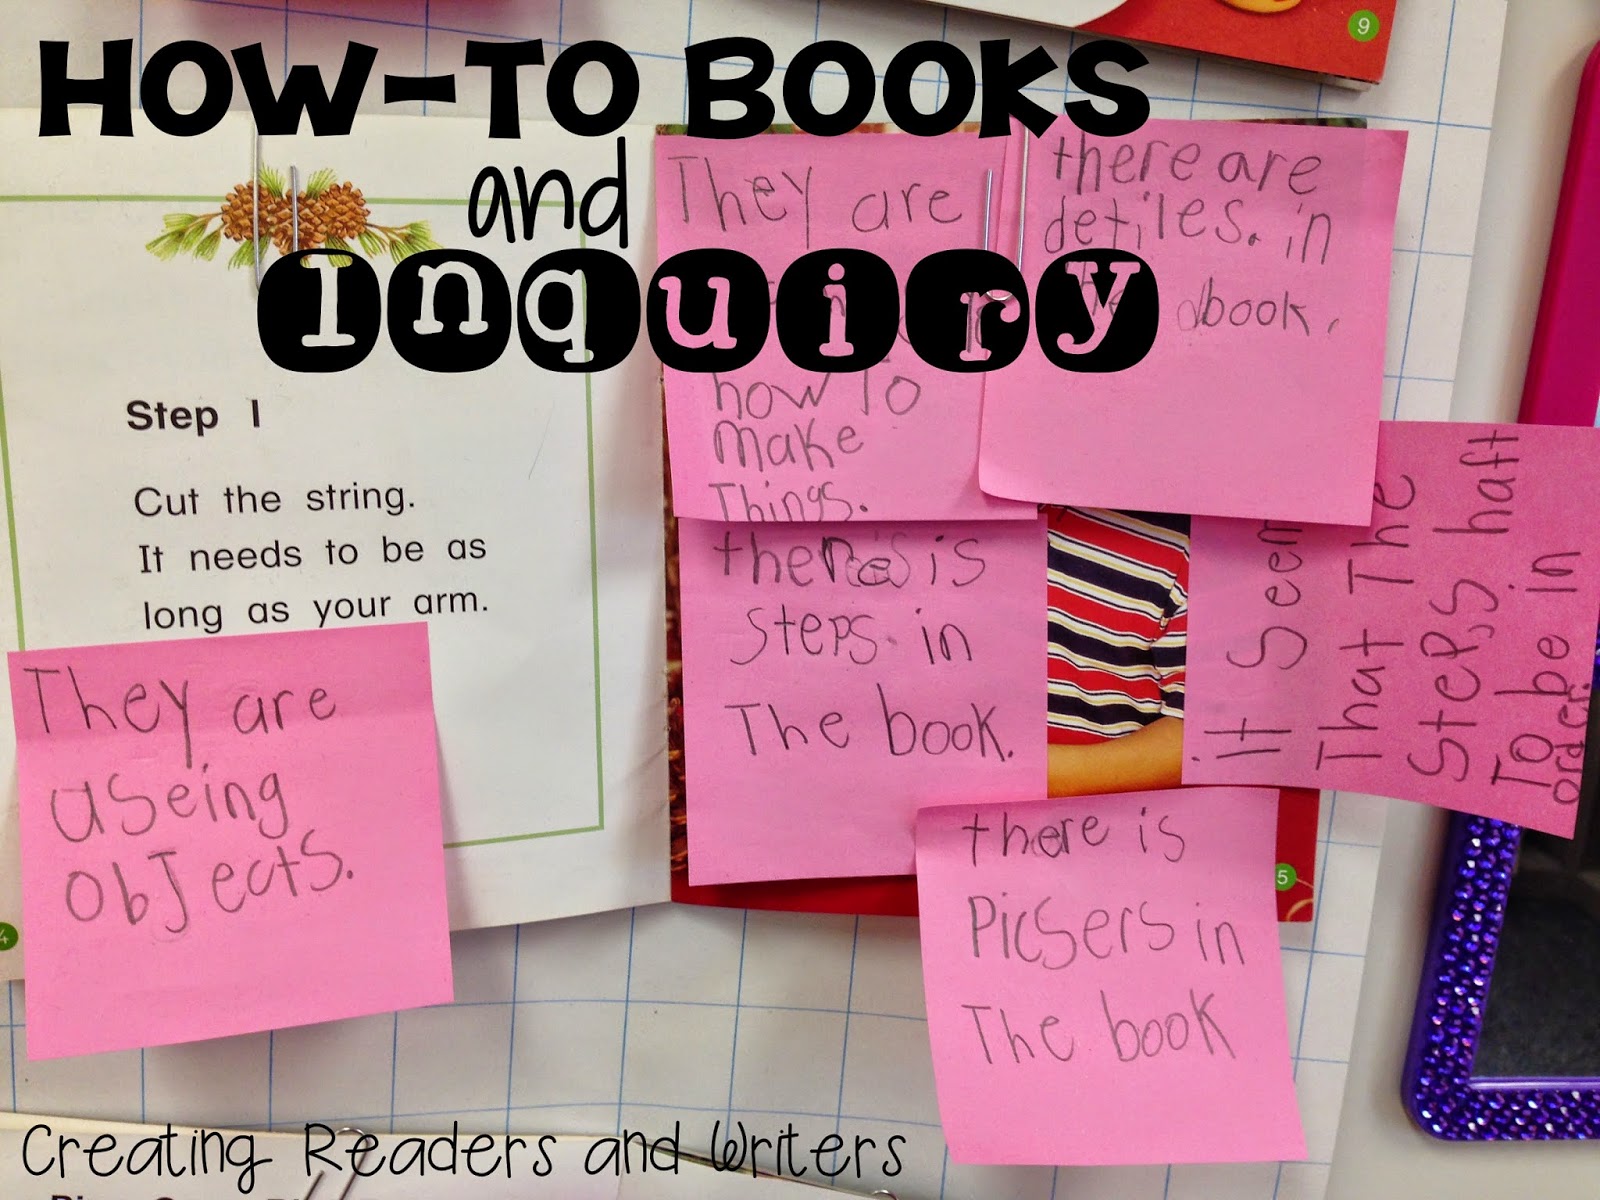 Creating Readers and Writers: Getting Ready to Write How-To Books